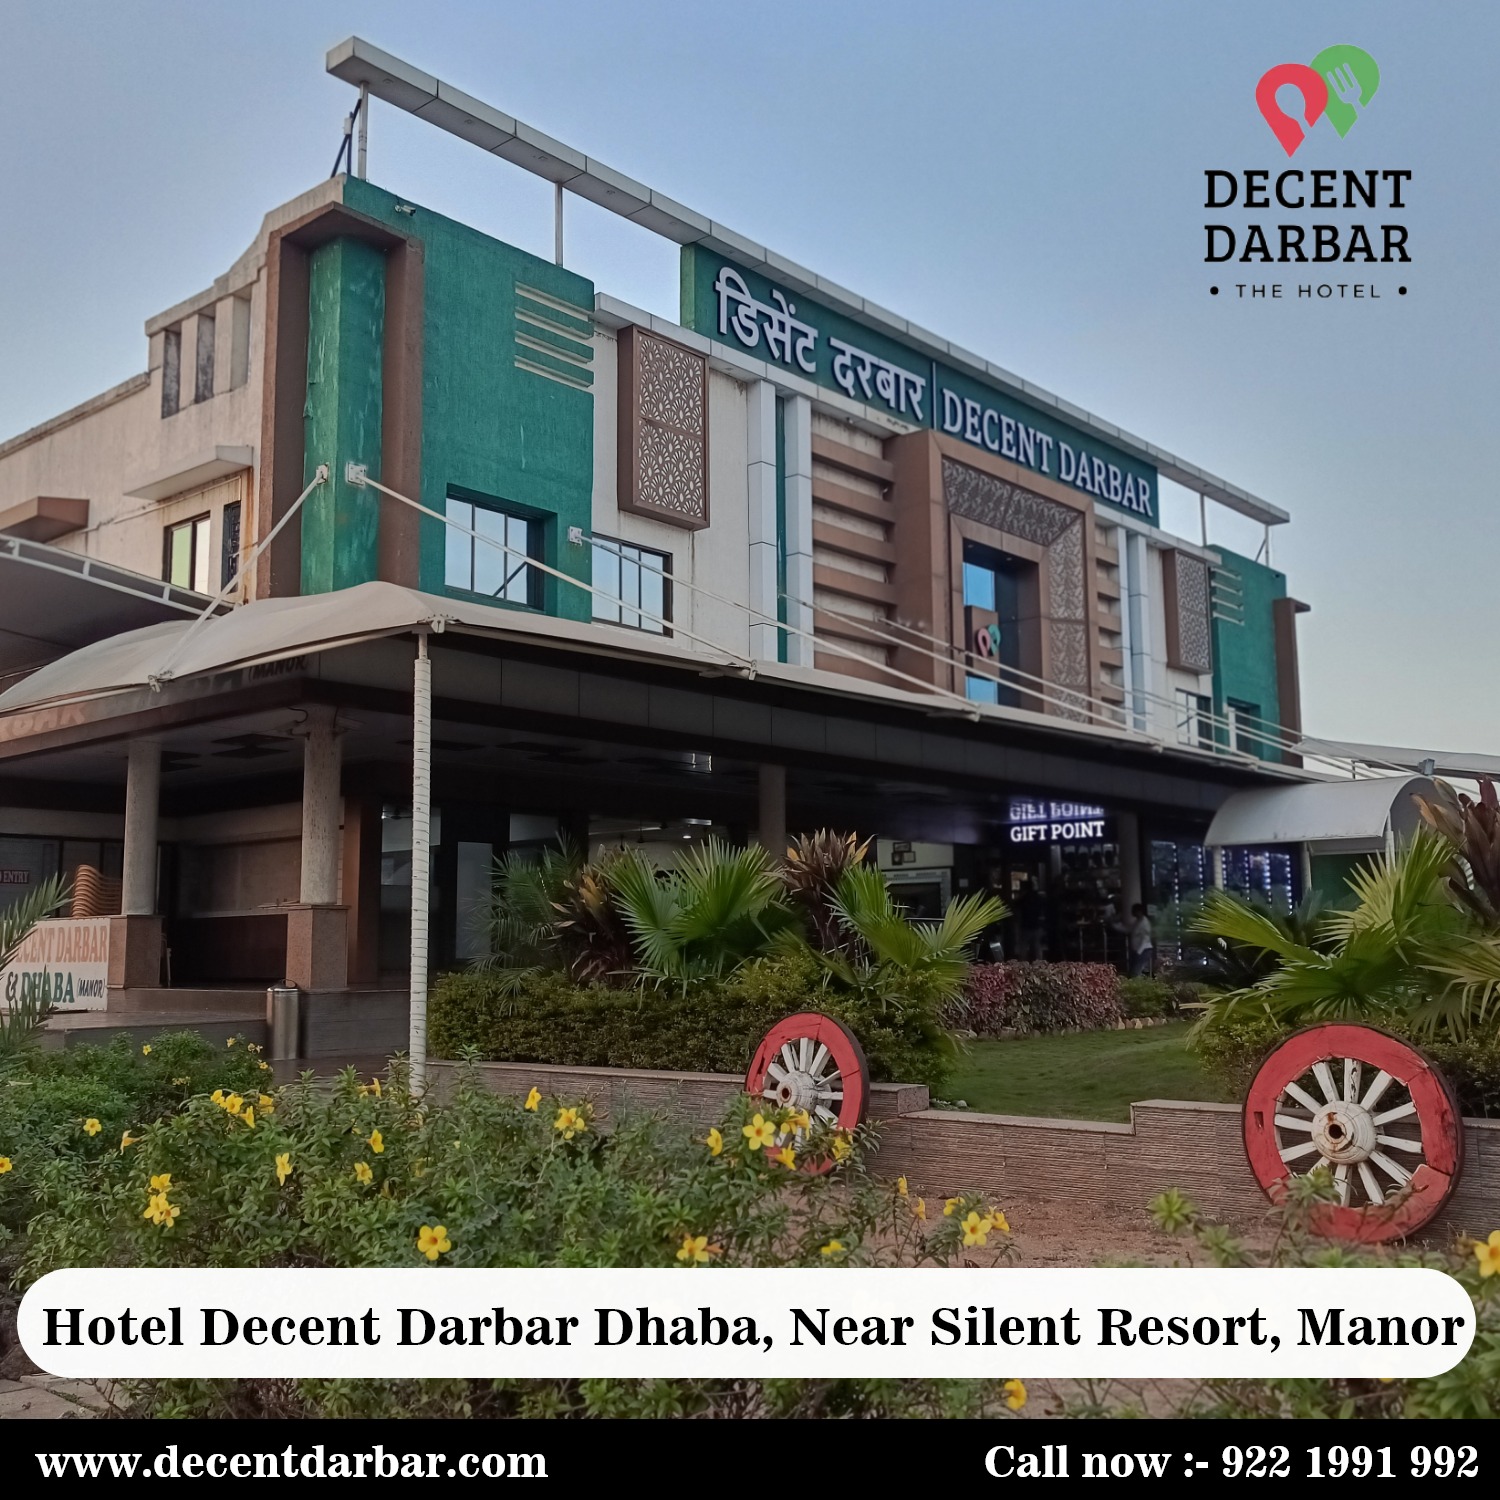 Decent Darbar: Your Gateway to Exquisite Hospitali